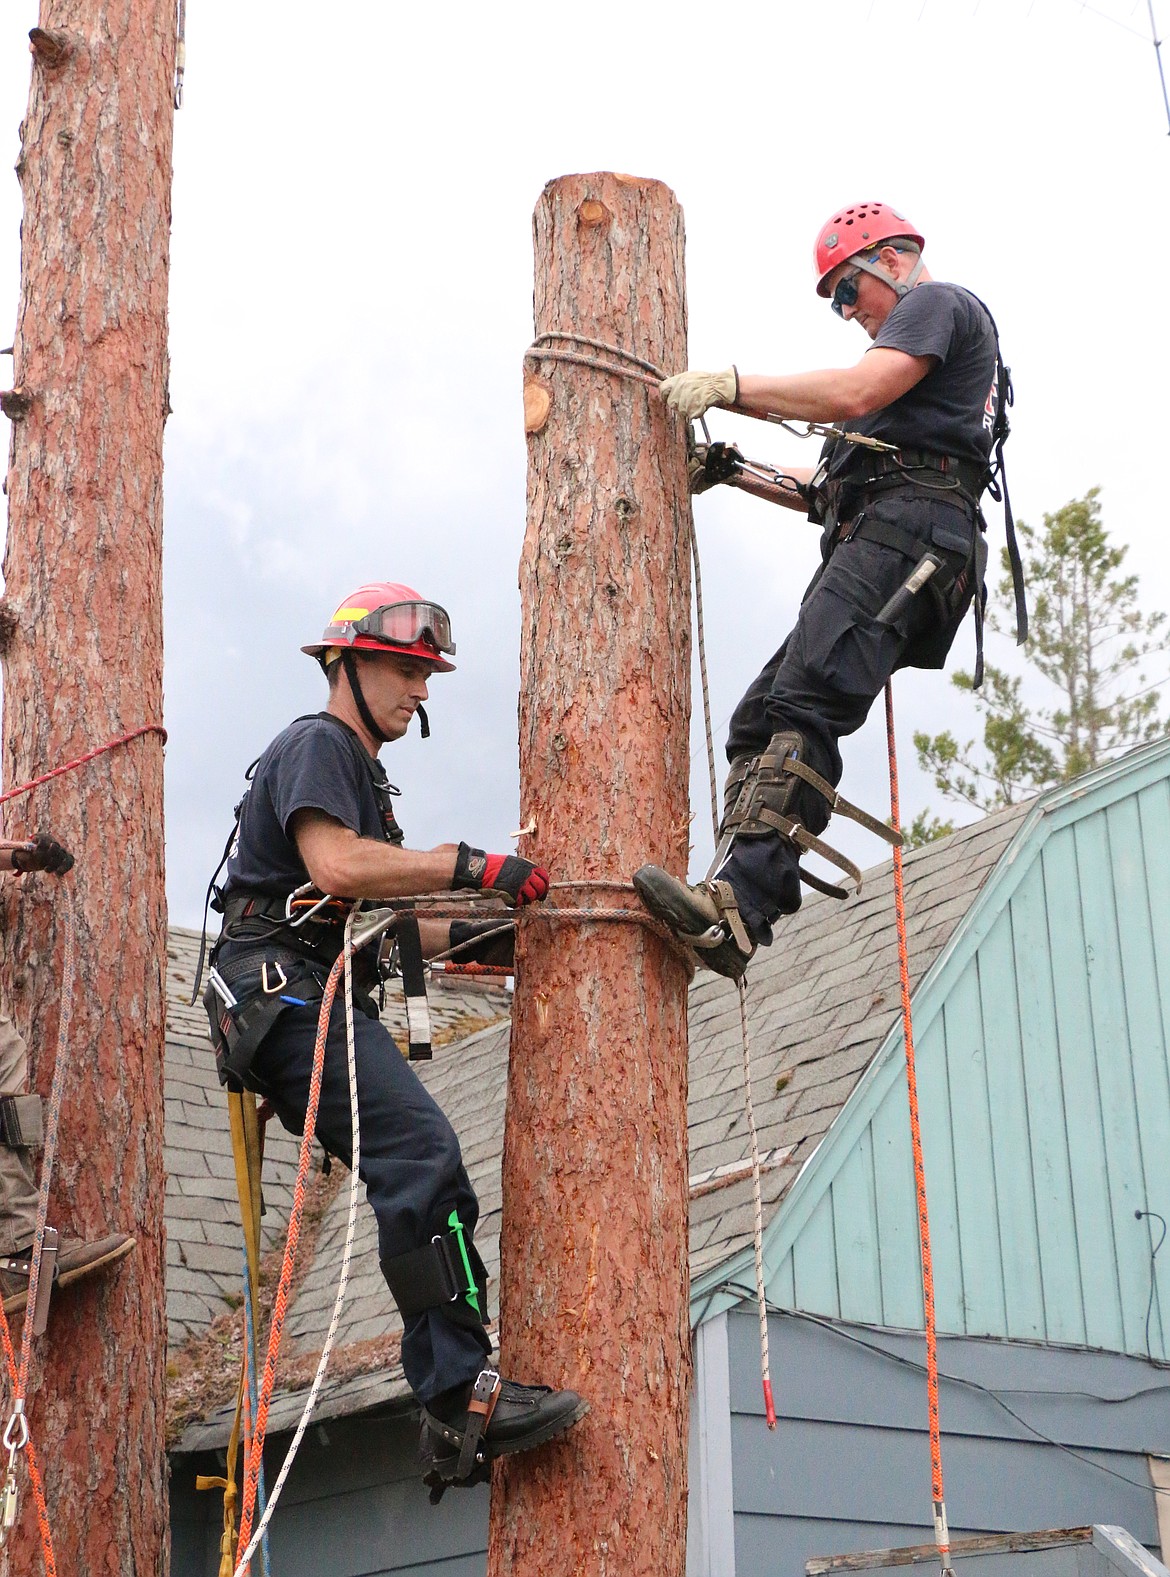 Area firefighters practice climbing a spar pole during a mid-June training exercise on tree rescues.